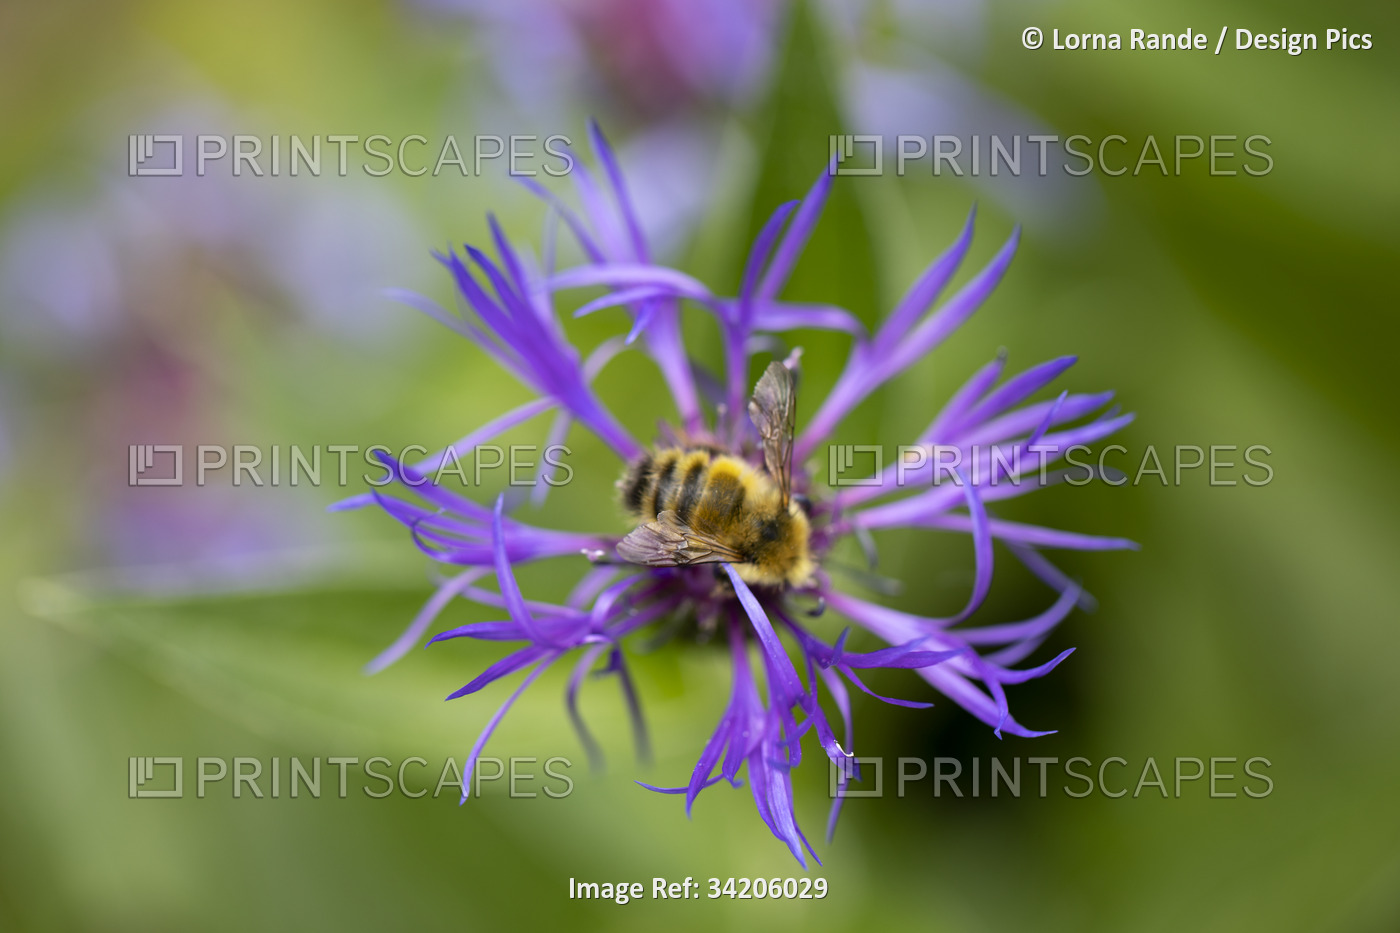 Insect resting on a purple blossom; Surrey, British Columbia, Canada